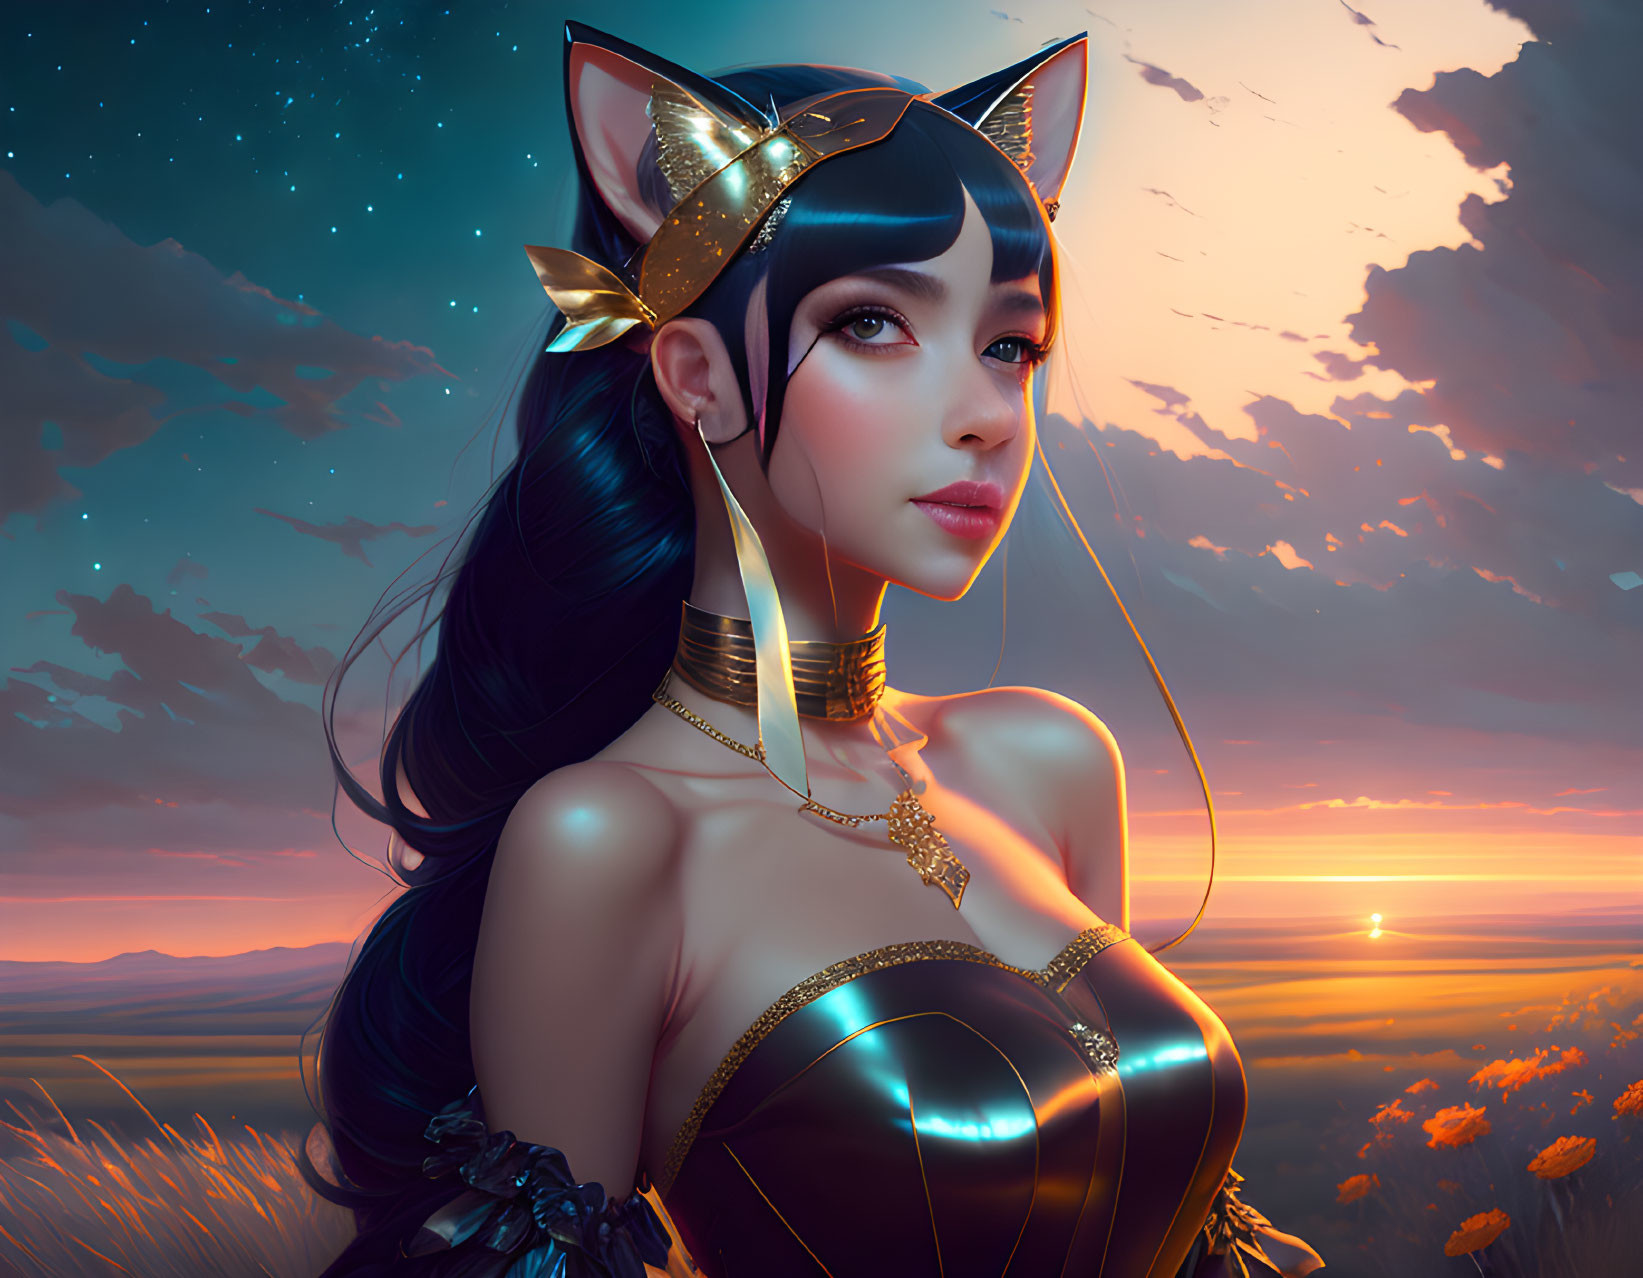 Digital Artwork: Woman with Cat Ears and Striking Eyes in Sunset Scene